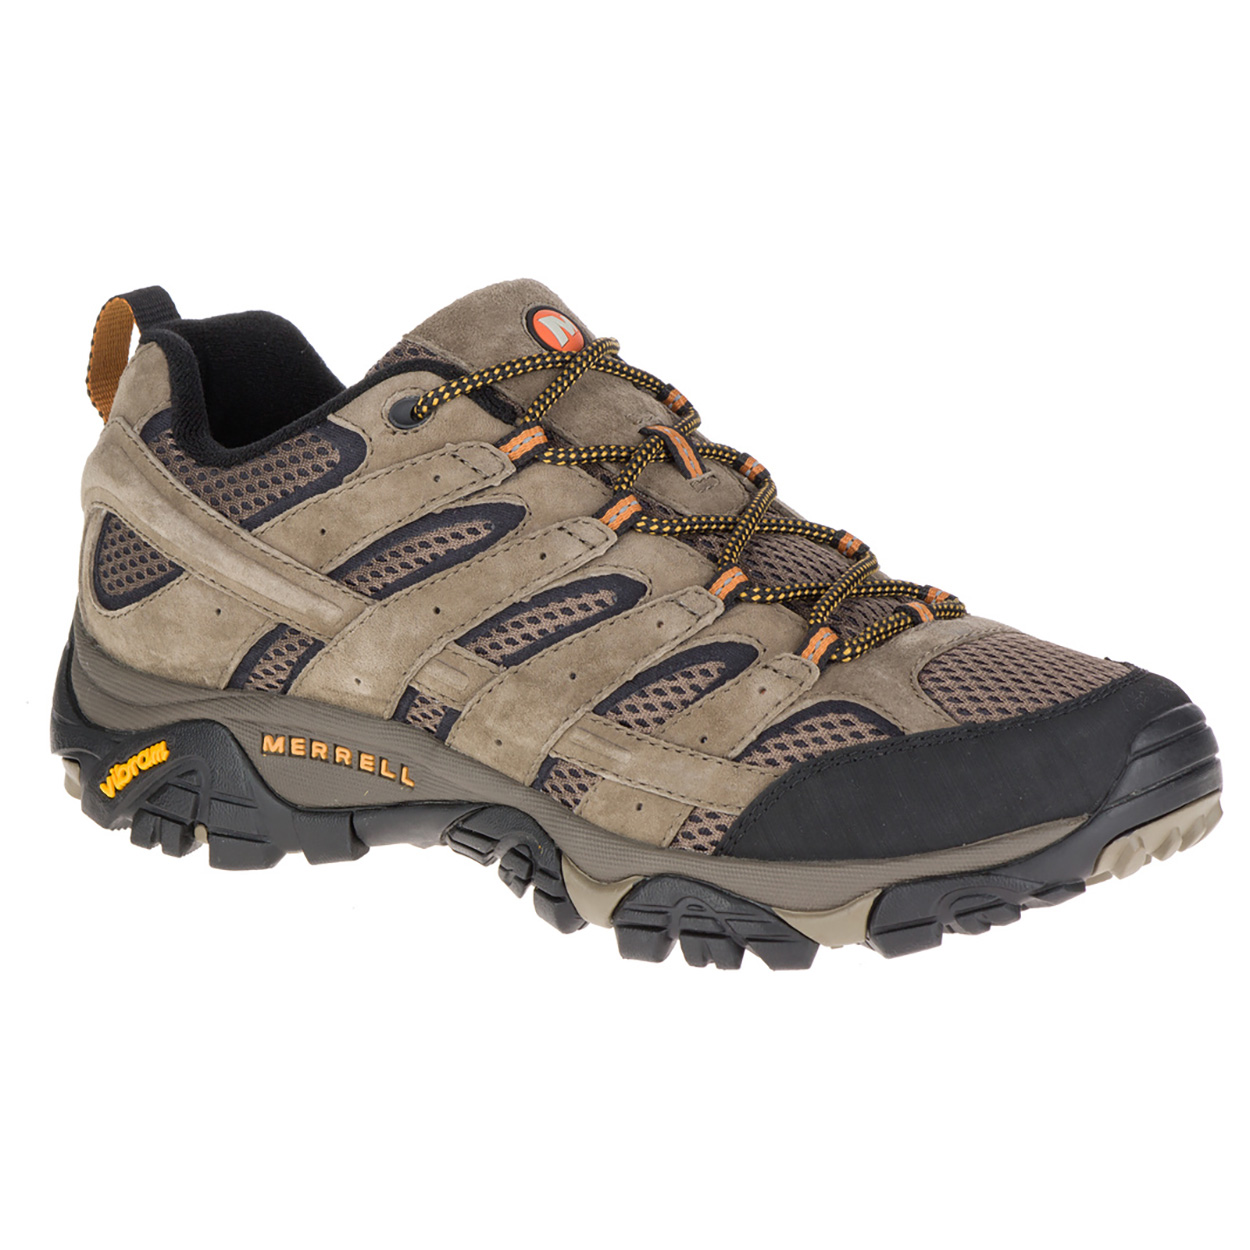 ventilated hiking shoes